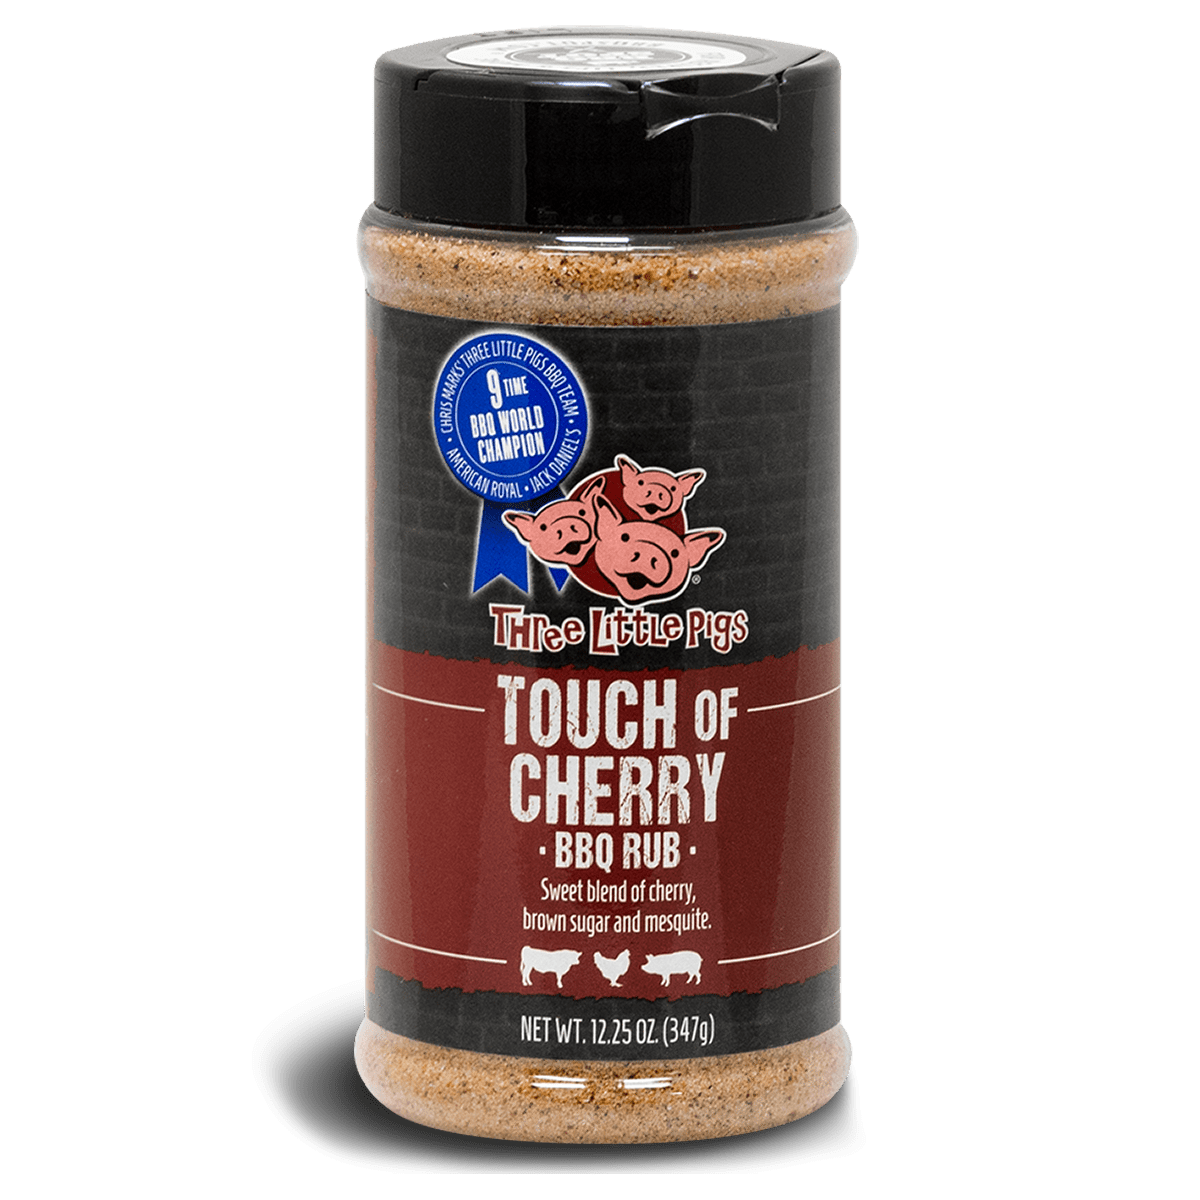 Three Little Pigs Touch of Cherry BBQ Rub, Accessory, Hark